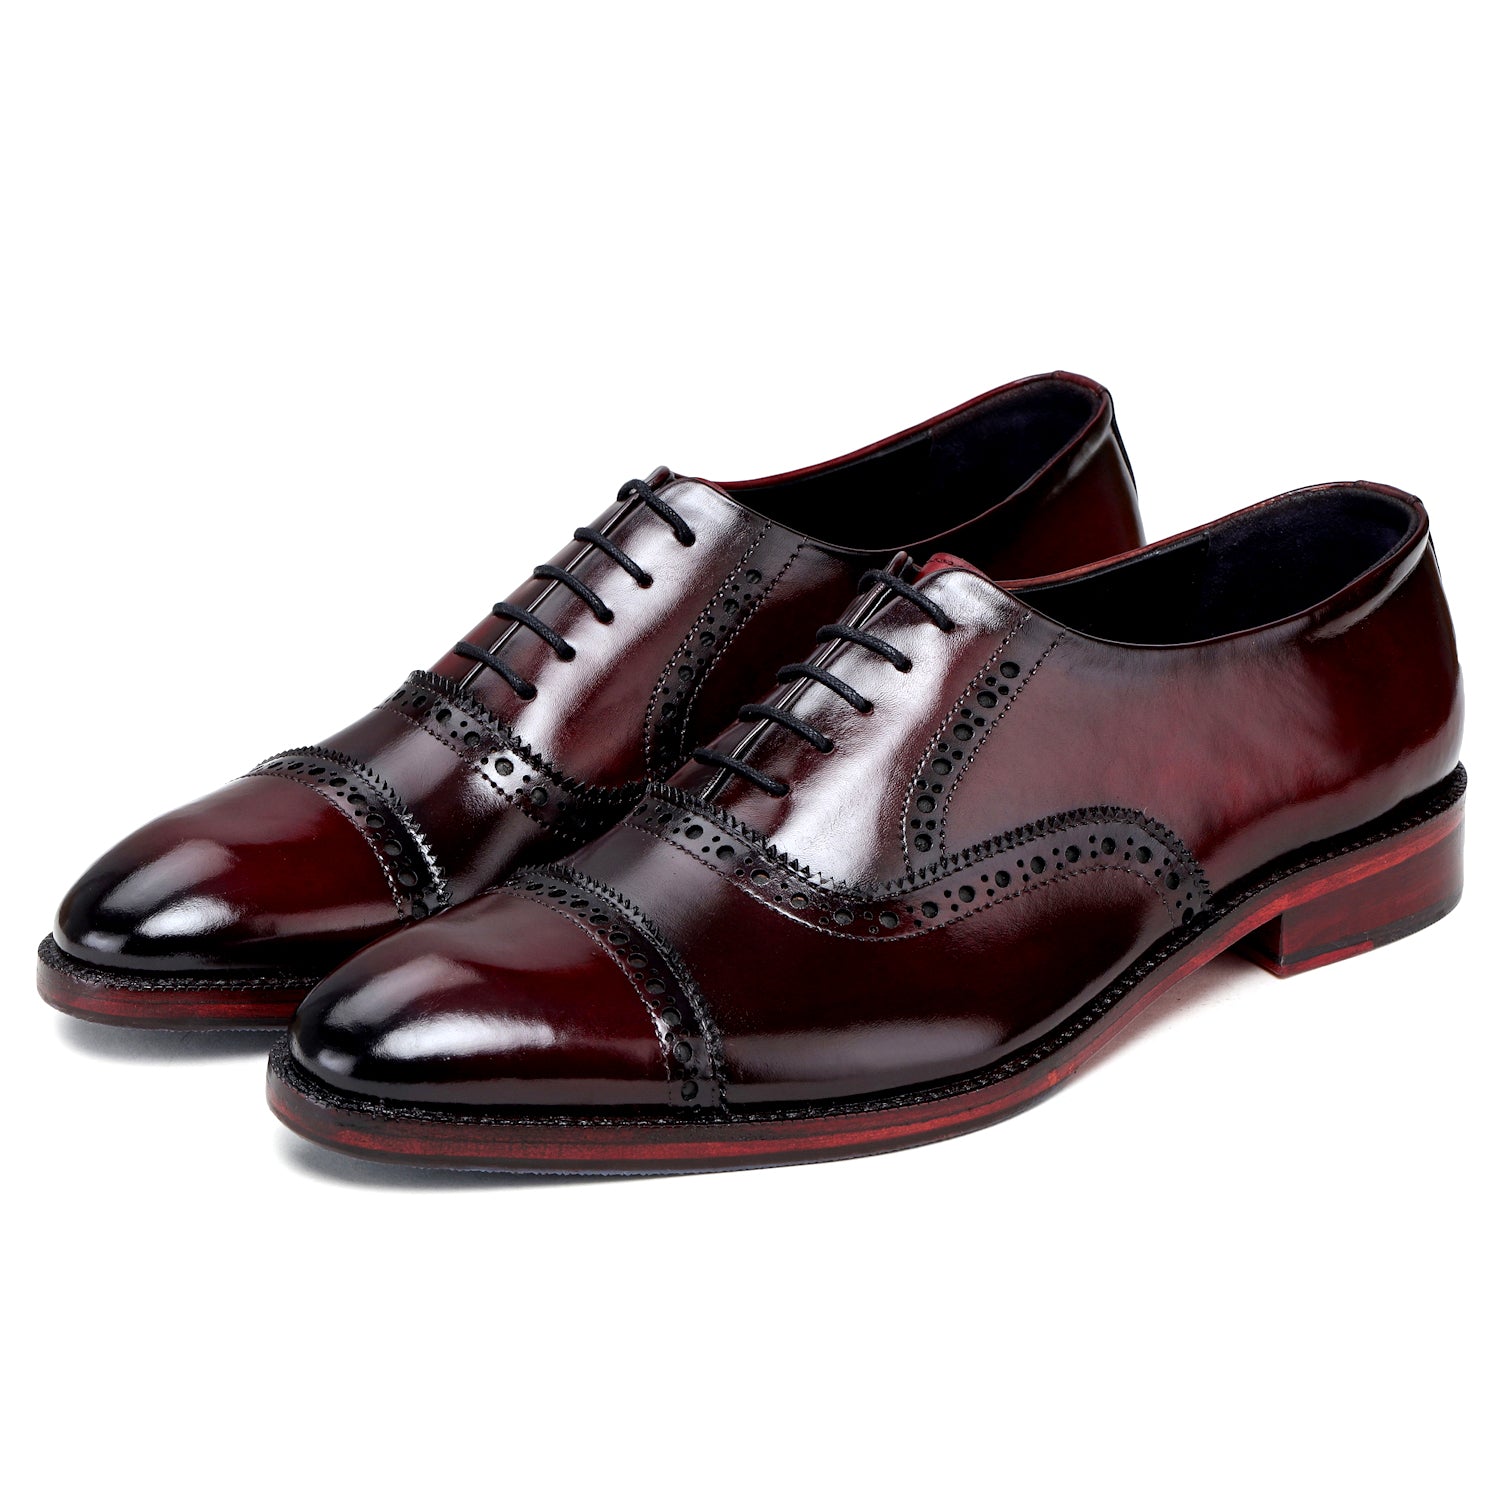 Oxford Burgundy Red Dress Shoes for Men Brogue Shoes